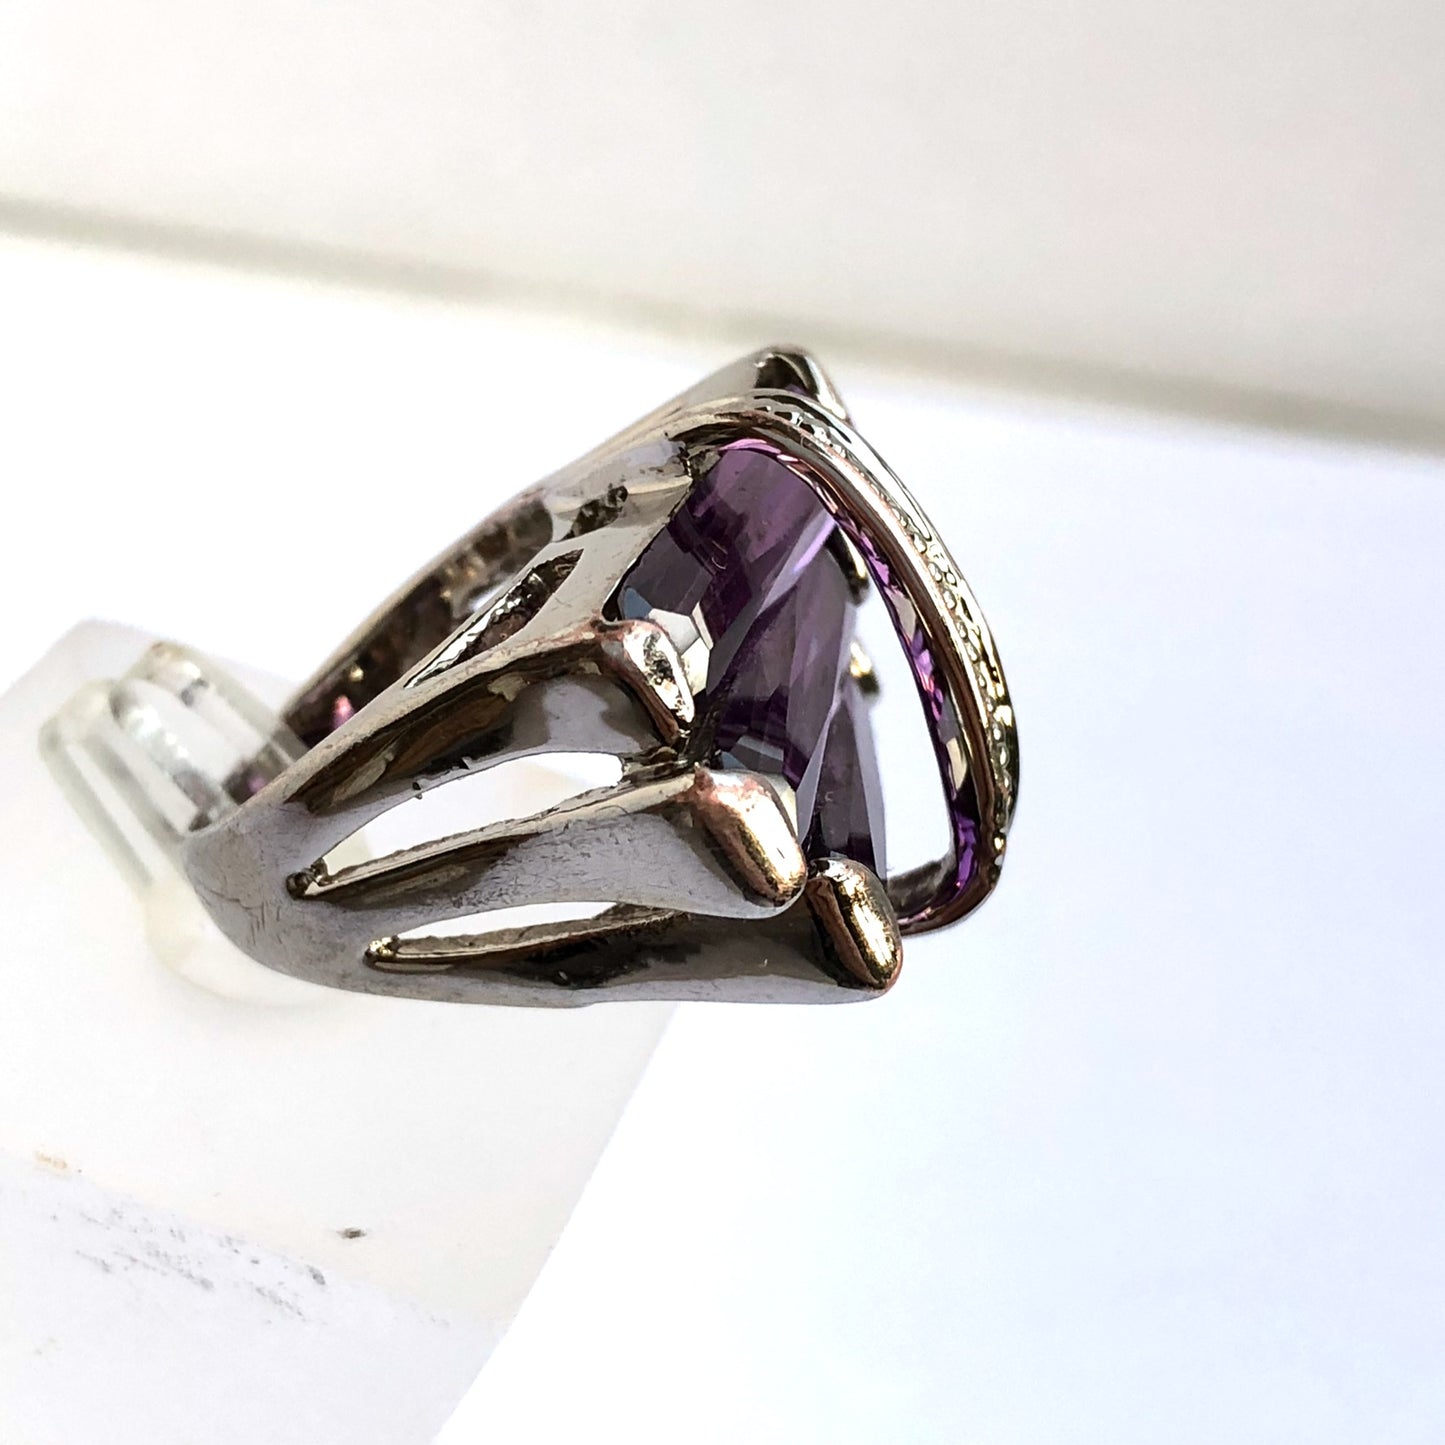 Silver Tone RING w/ Purple Crystals 14.73g Size 5.5